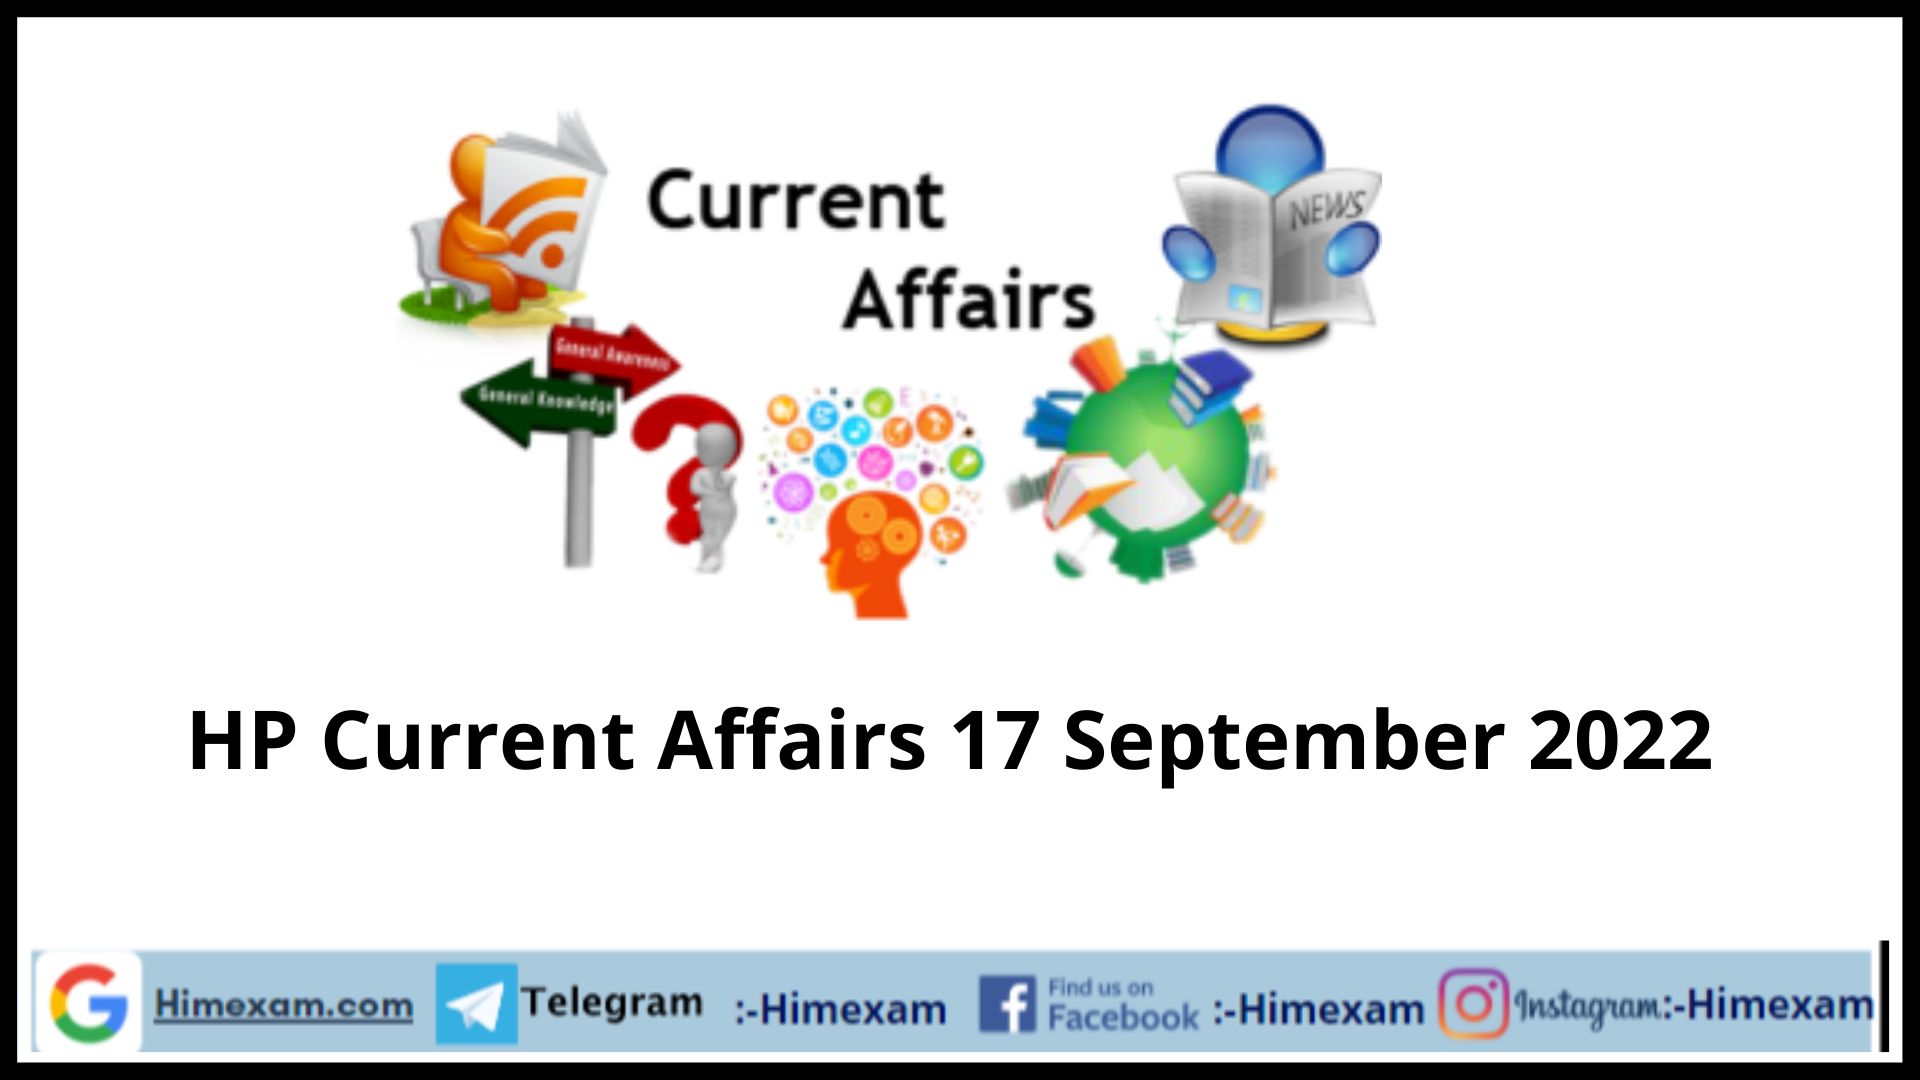 HP Current Affairs 17 September 2022